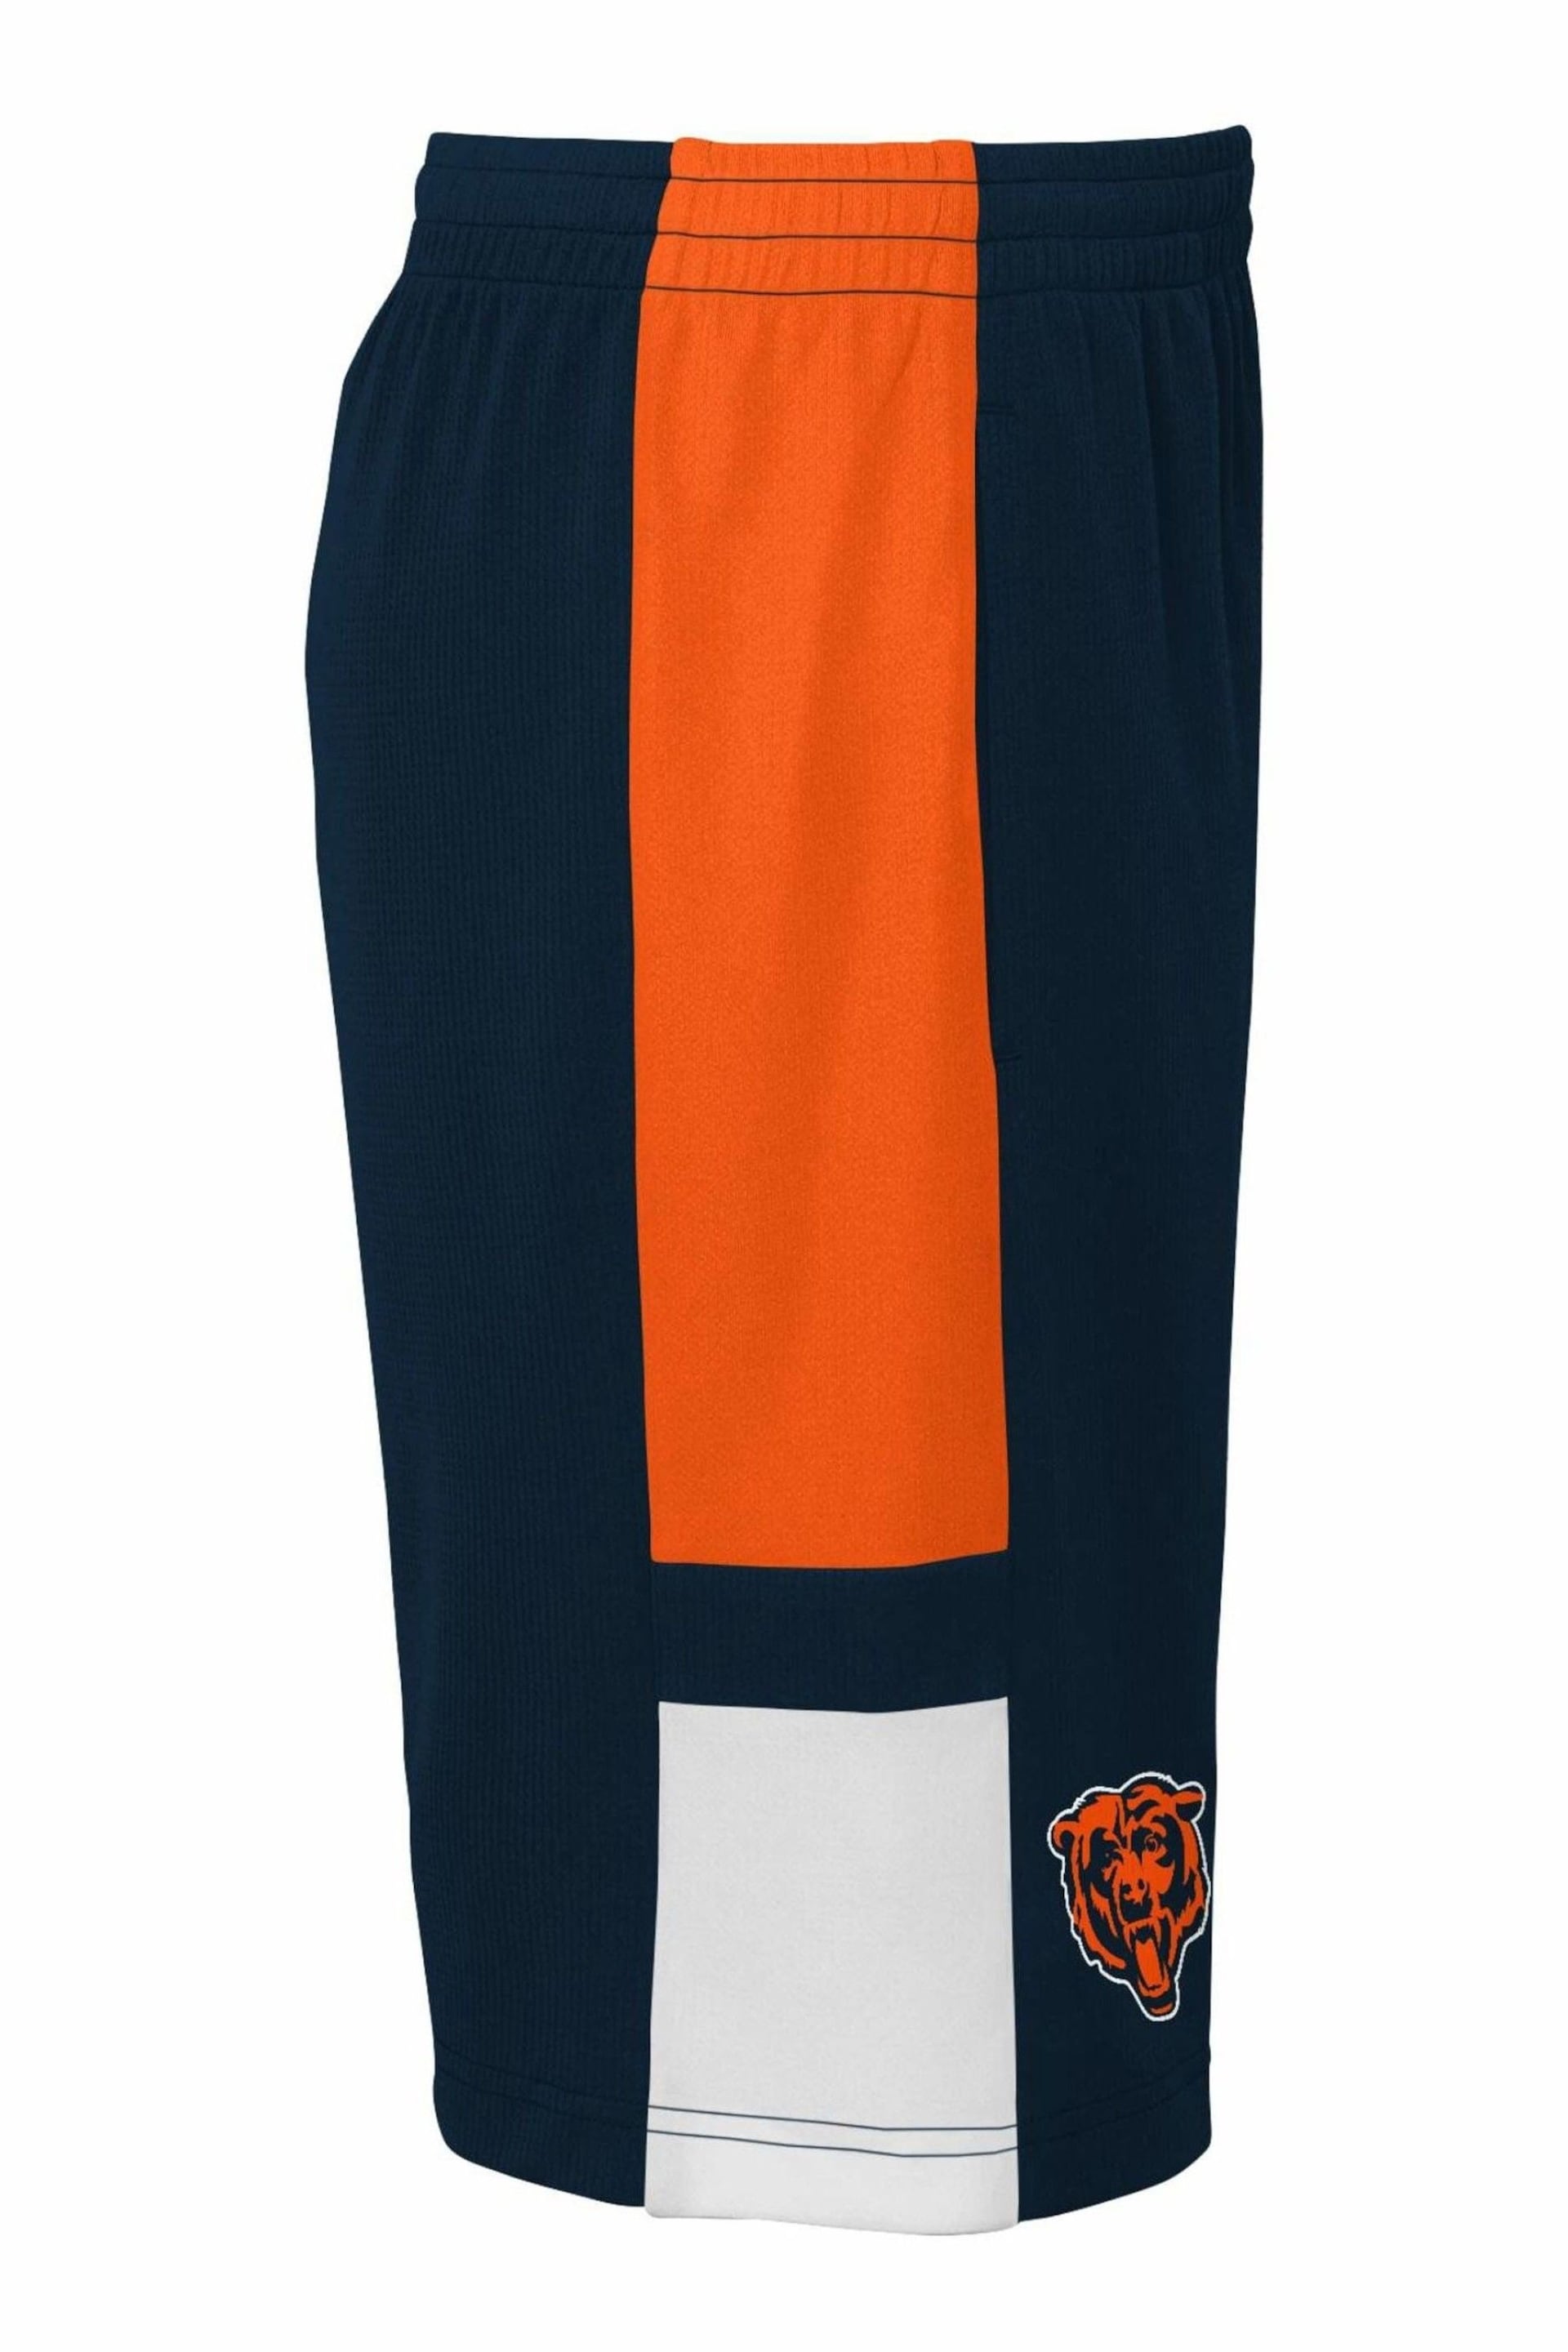 Fanatics Blue Chicago Bears Lateral Mesh Performance Shorts - Image 3 of 4